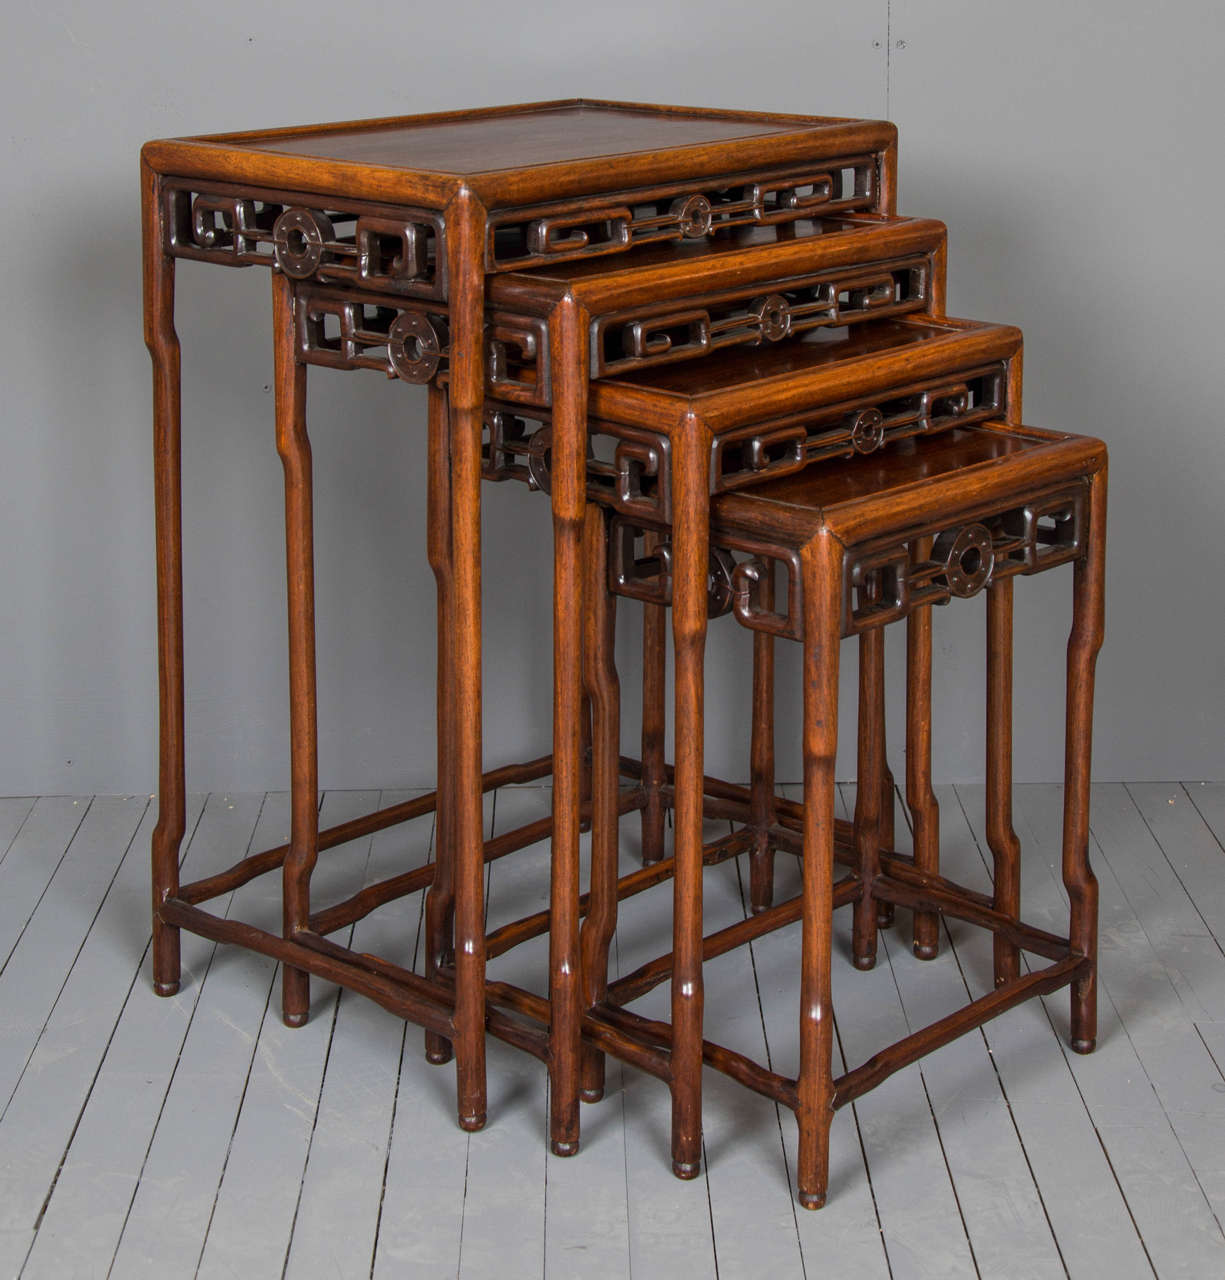 A very good quality set of four Padouk Chinese nesting tables, circa 1870. The tables were export and feature an apron around each one with a simple border design and solid top. The tables when together, measure 20 in – 51 cm in overall width, 14 ½